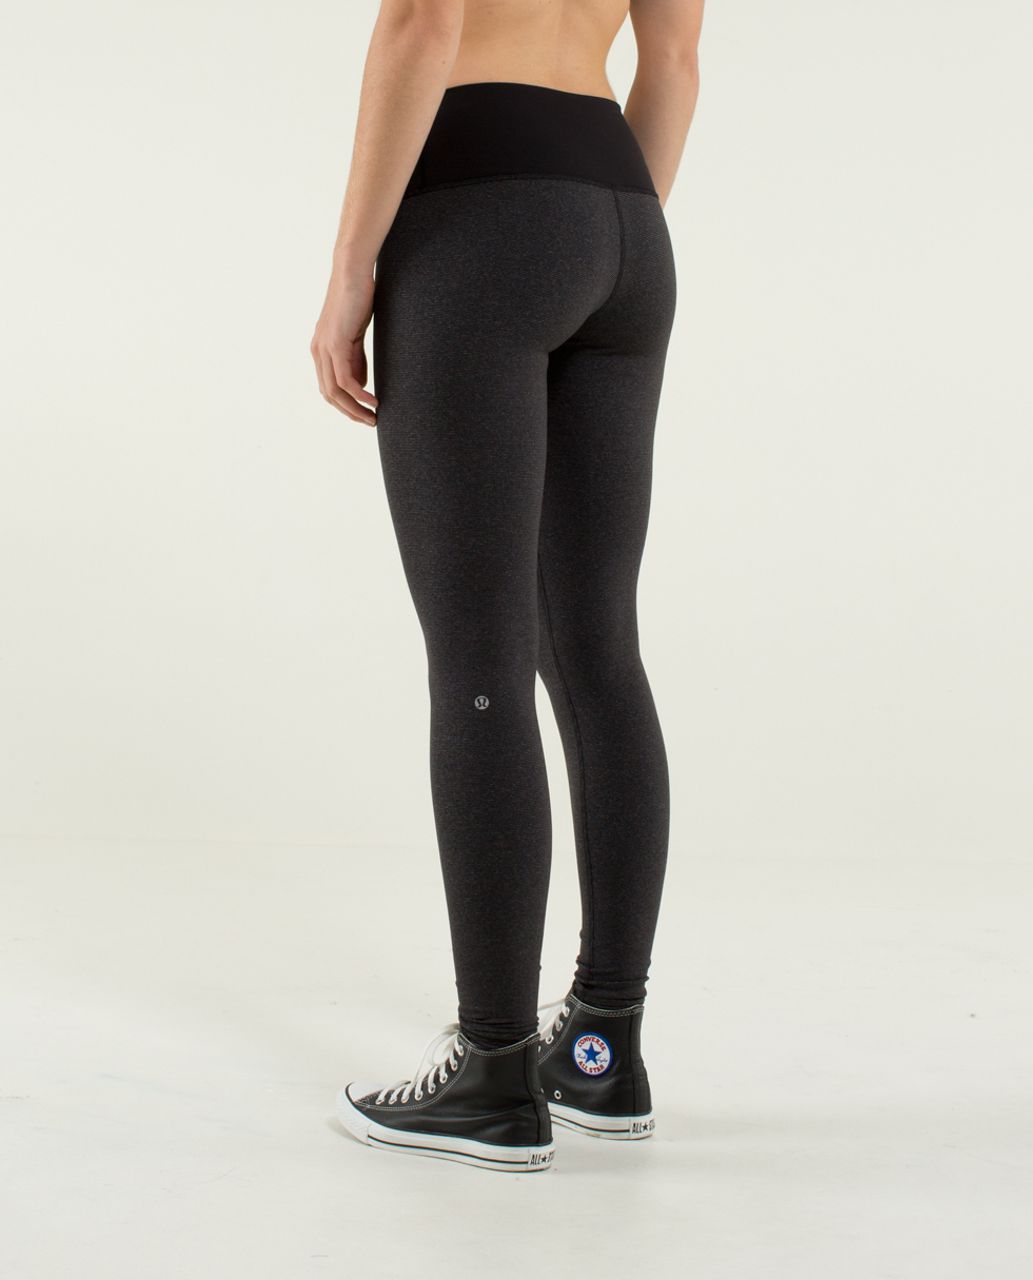 Lululemon Wunder Under Crop Wee Are From Space Cashew Black size 6 NWT 2014  Luon